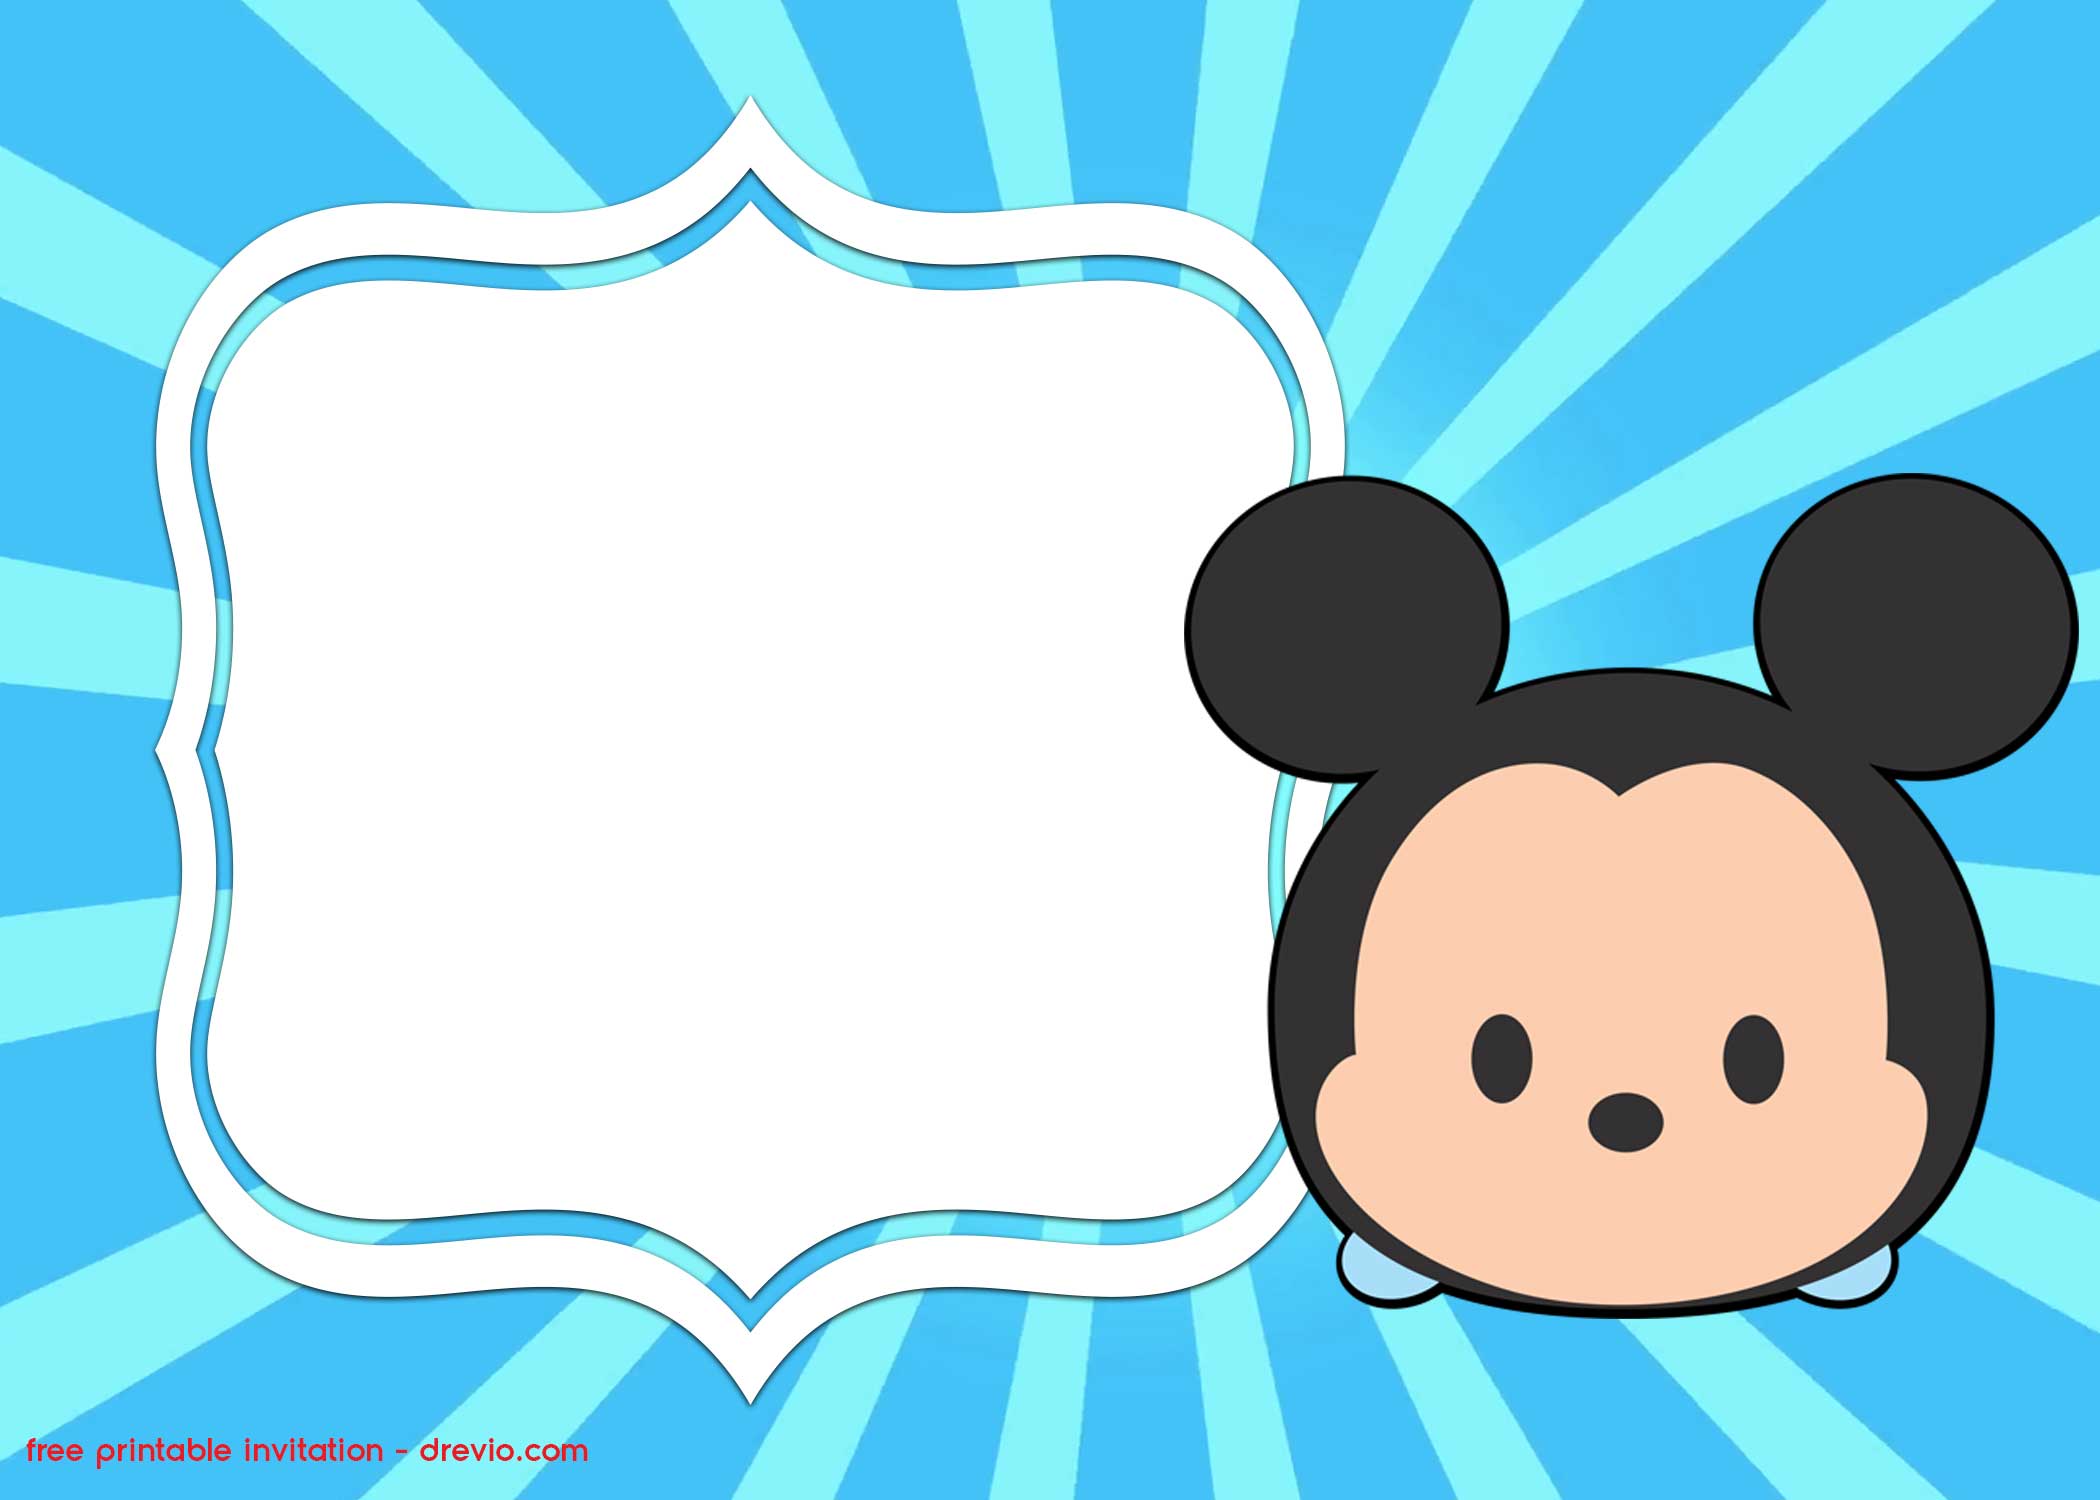 Free Printable Disney Tsum Tsum Invitation Templates Mickey And Friends Download Hundreds Free Printable Birthday Invitation Templates